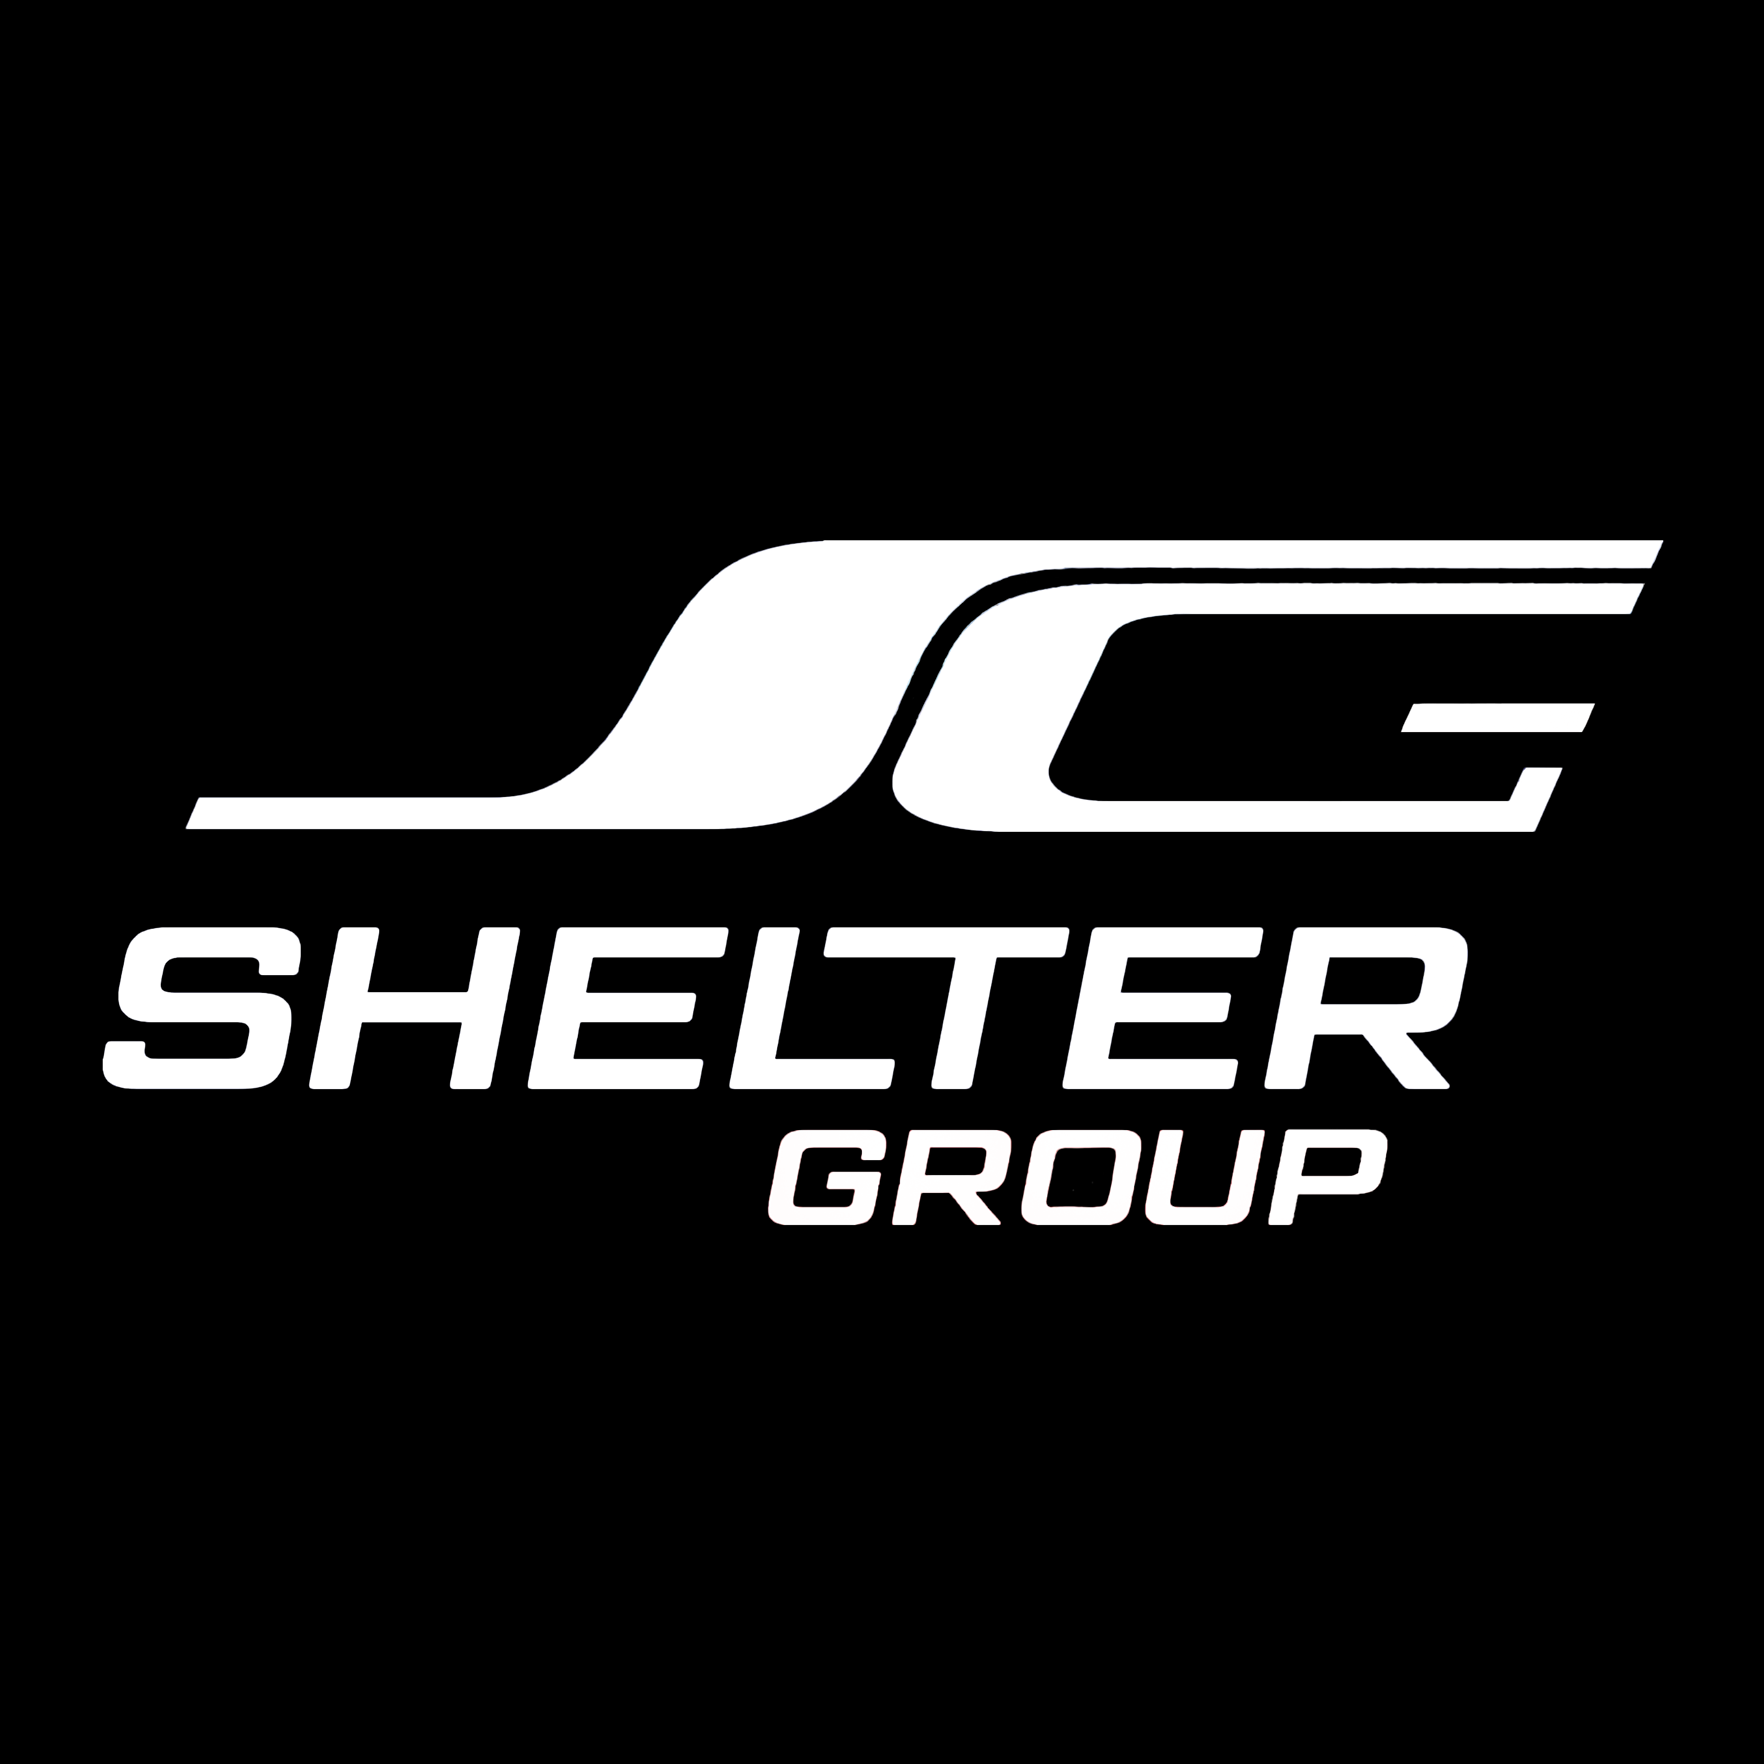 Shelter Group announcing